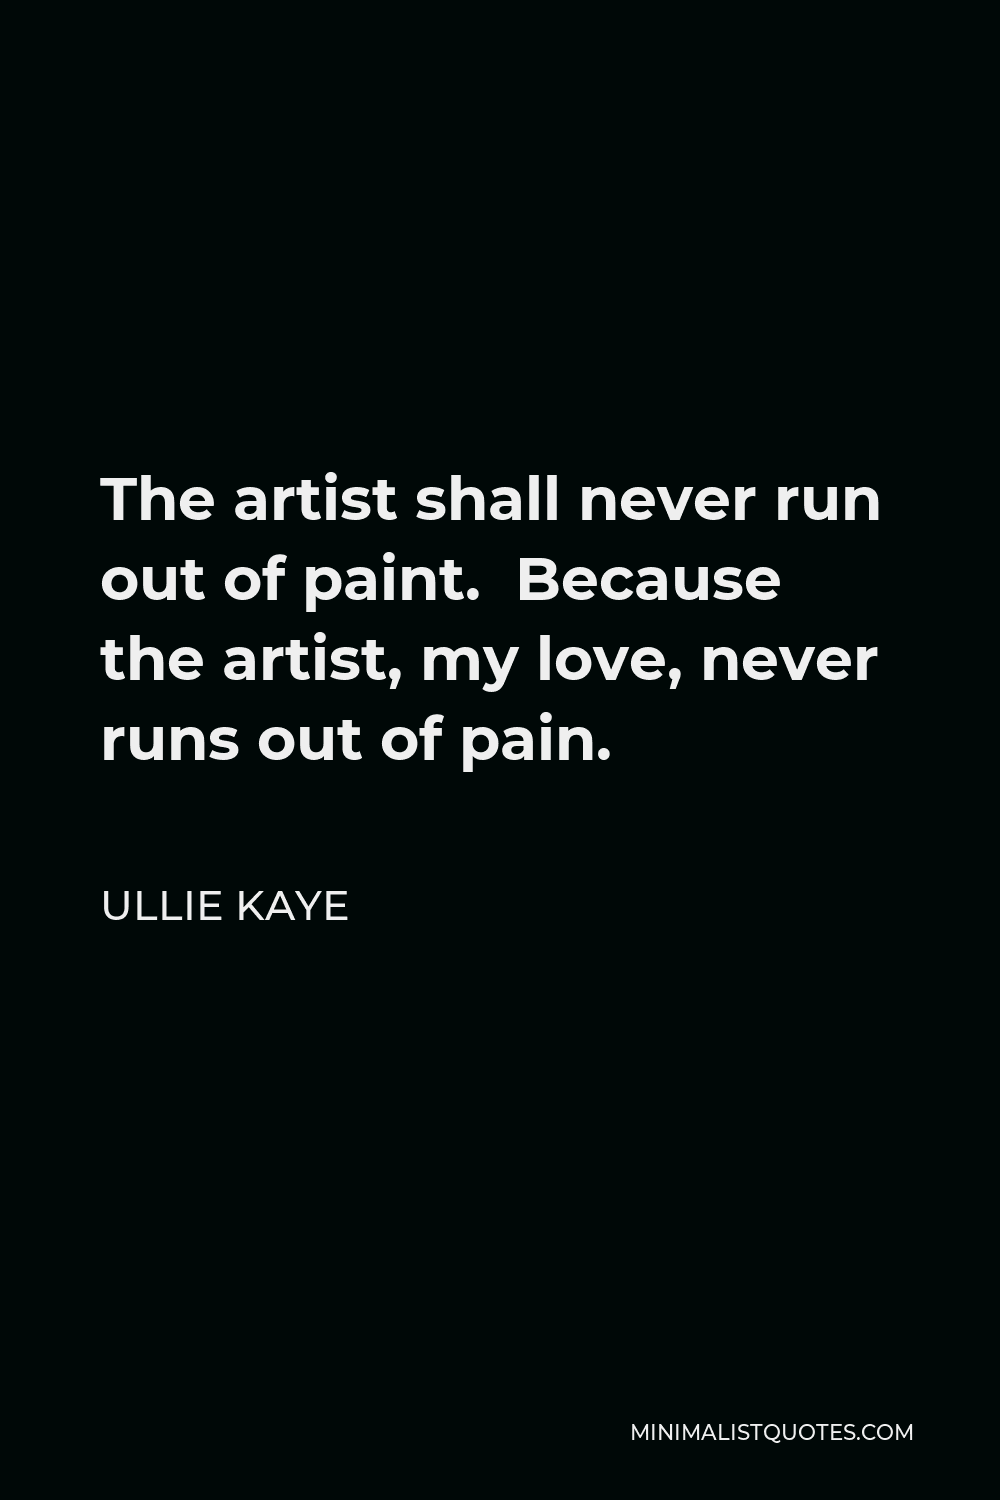 Ullie Kaye Quote - The artist shall never run out of paint. Because the artist, my love, never runs out of pain.